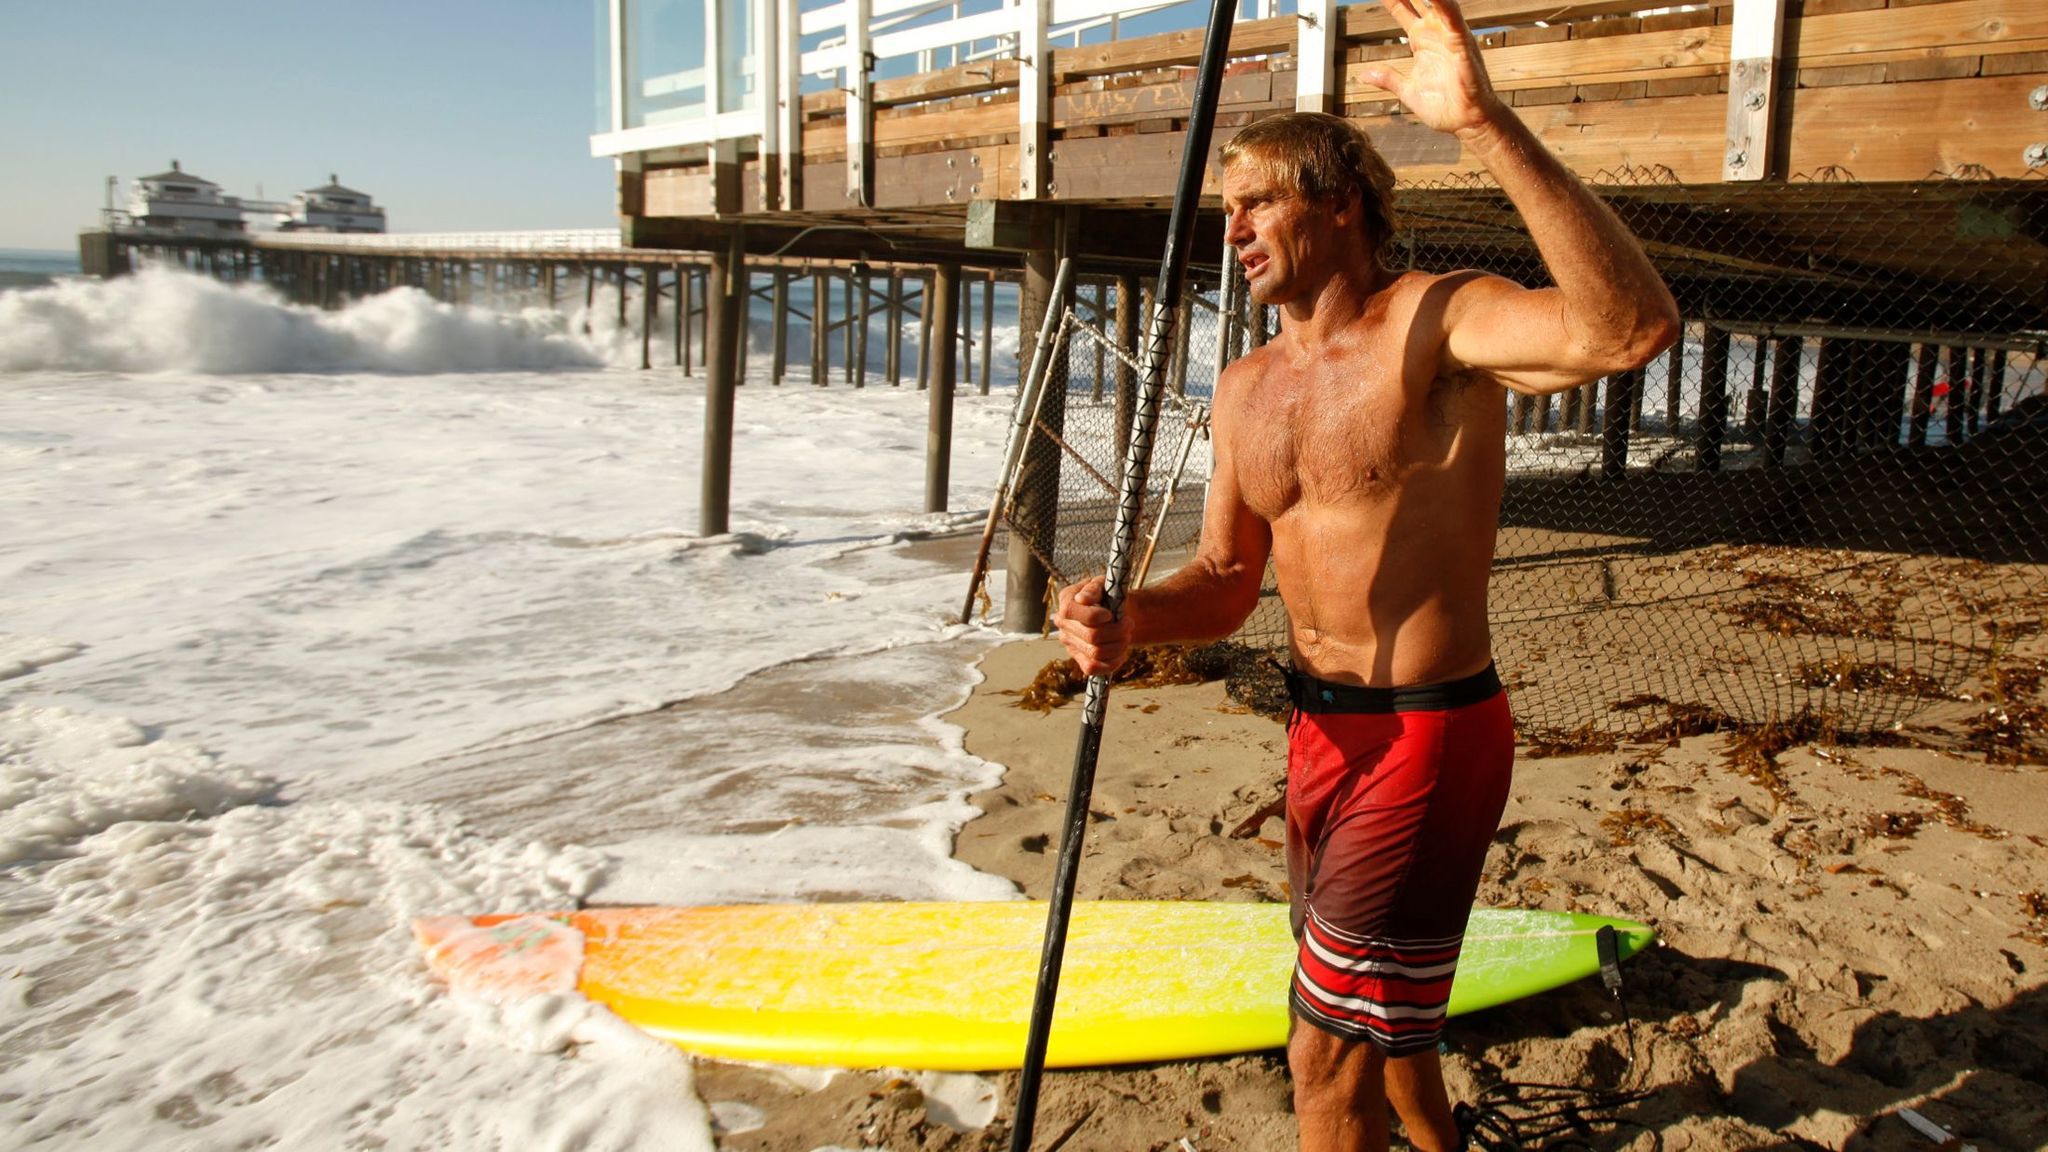 Renowned surfer Laird Hamilton prepares his standup paddle board in Malibu in this 2014 file photo.